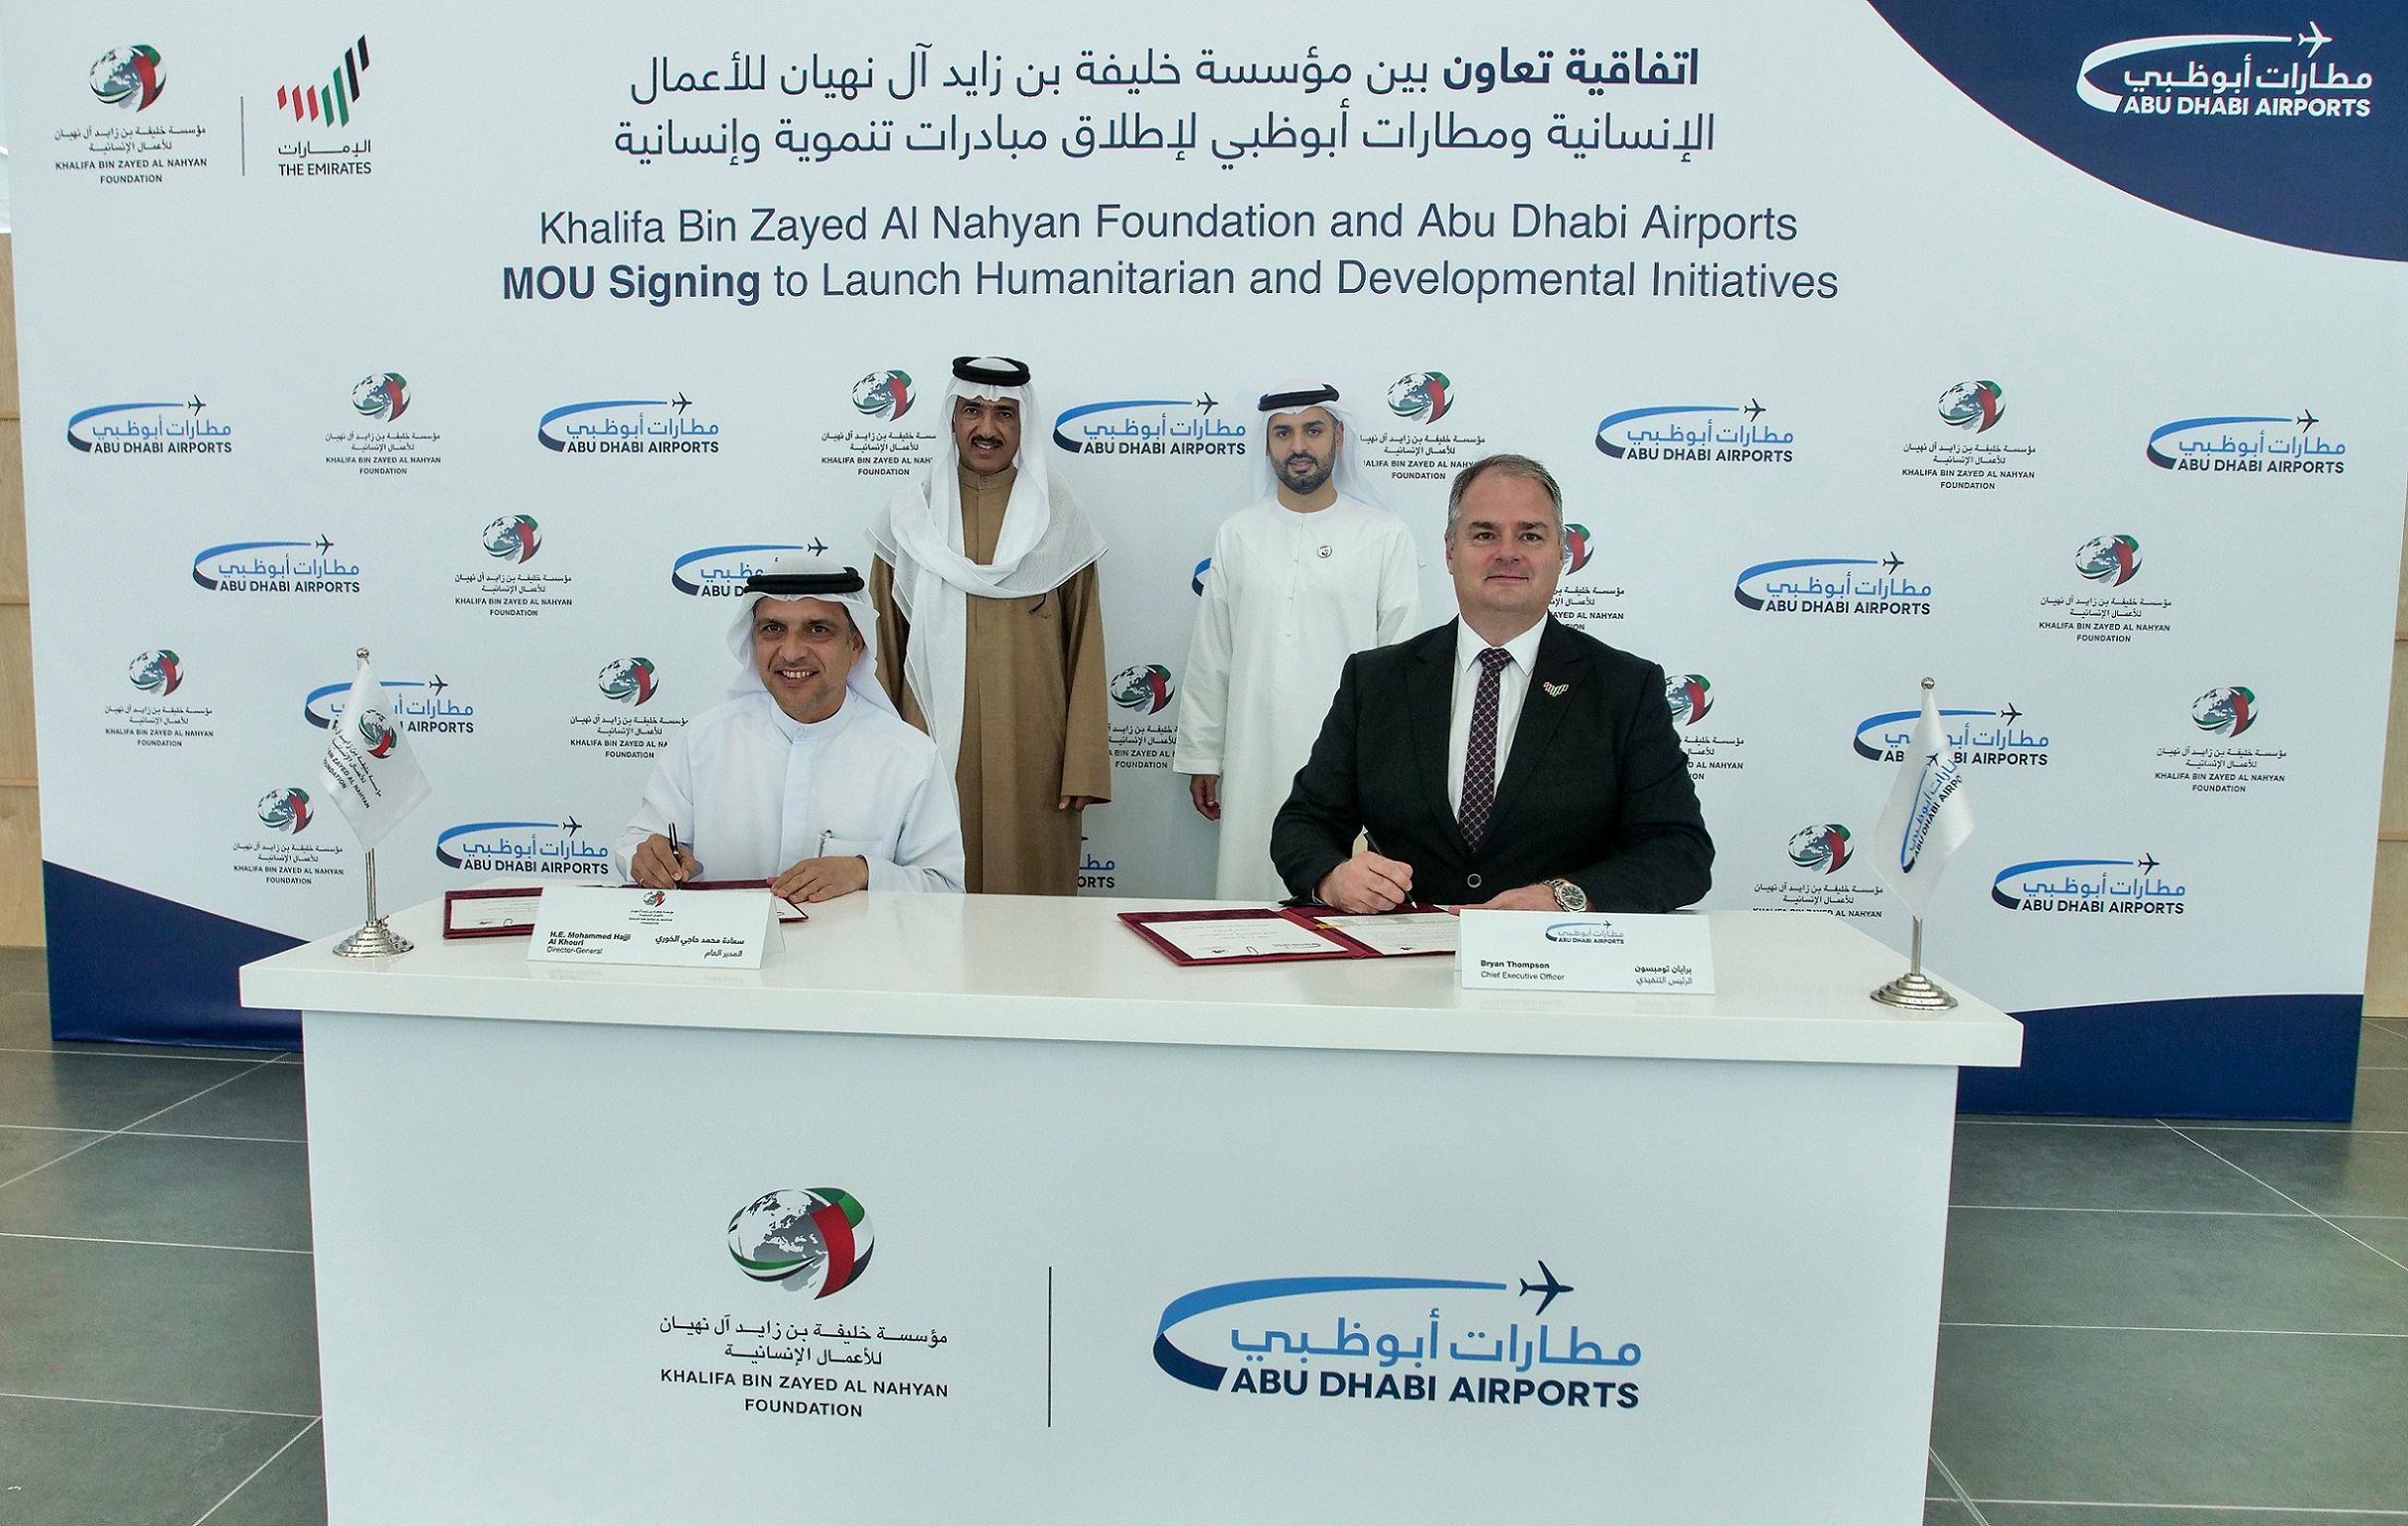 Abu Dhabi Airports And Khalifa Bin Zayed Al Nahyan Foundation To Cooperate In Charitable And Humanitarian Initiatives